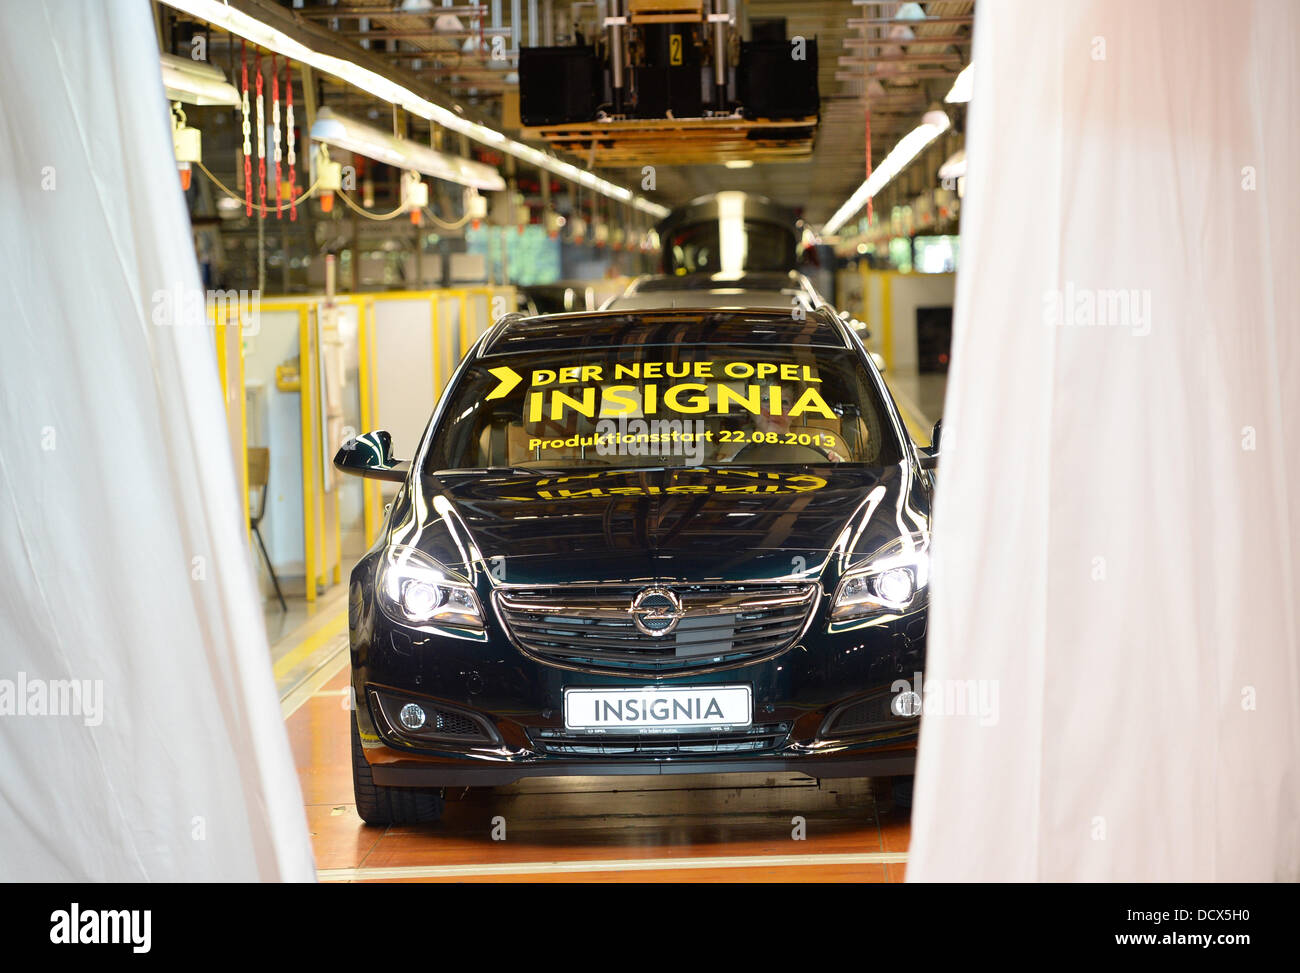 View of the first Opel Insignia Sports Tourer to be sold, at the Opel plant in Ruesselsheim, Germany, 22 August 2013. The car manufacturer has revised its nearly five-year-old flagship. The second Insignia generation - with a new design, new engines and a revised suspension - will be presented to the public at the IAA motor show in September. Photo: ARNE DEDERT Stock Photo